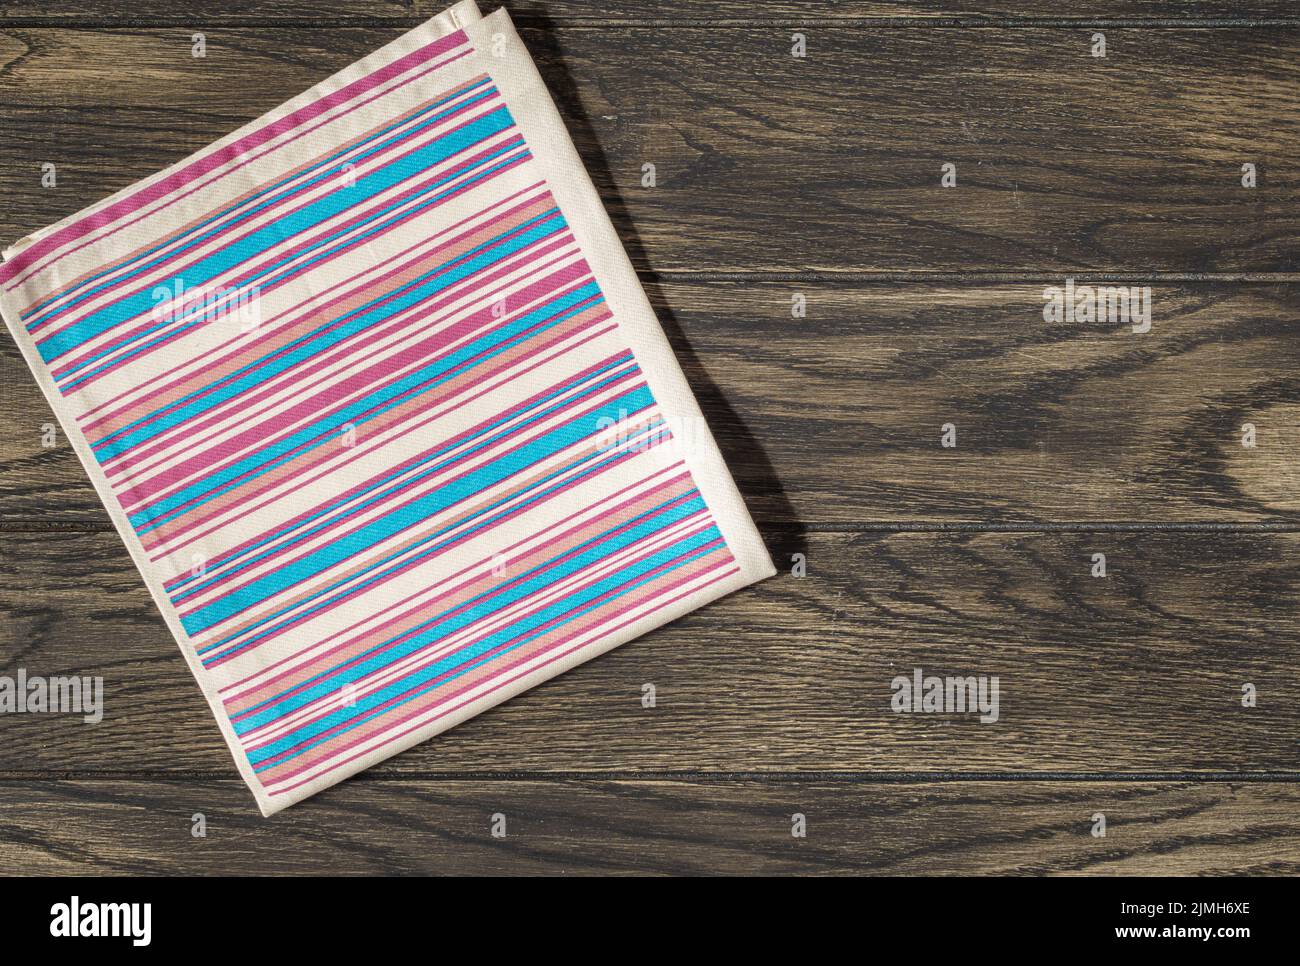 Food background. Striped multicolored napkin from left side of wooden table top view. Stock Photo